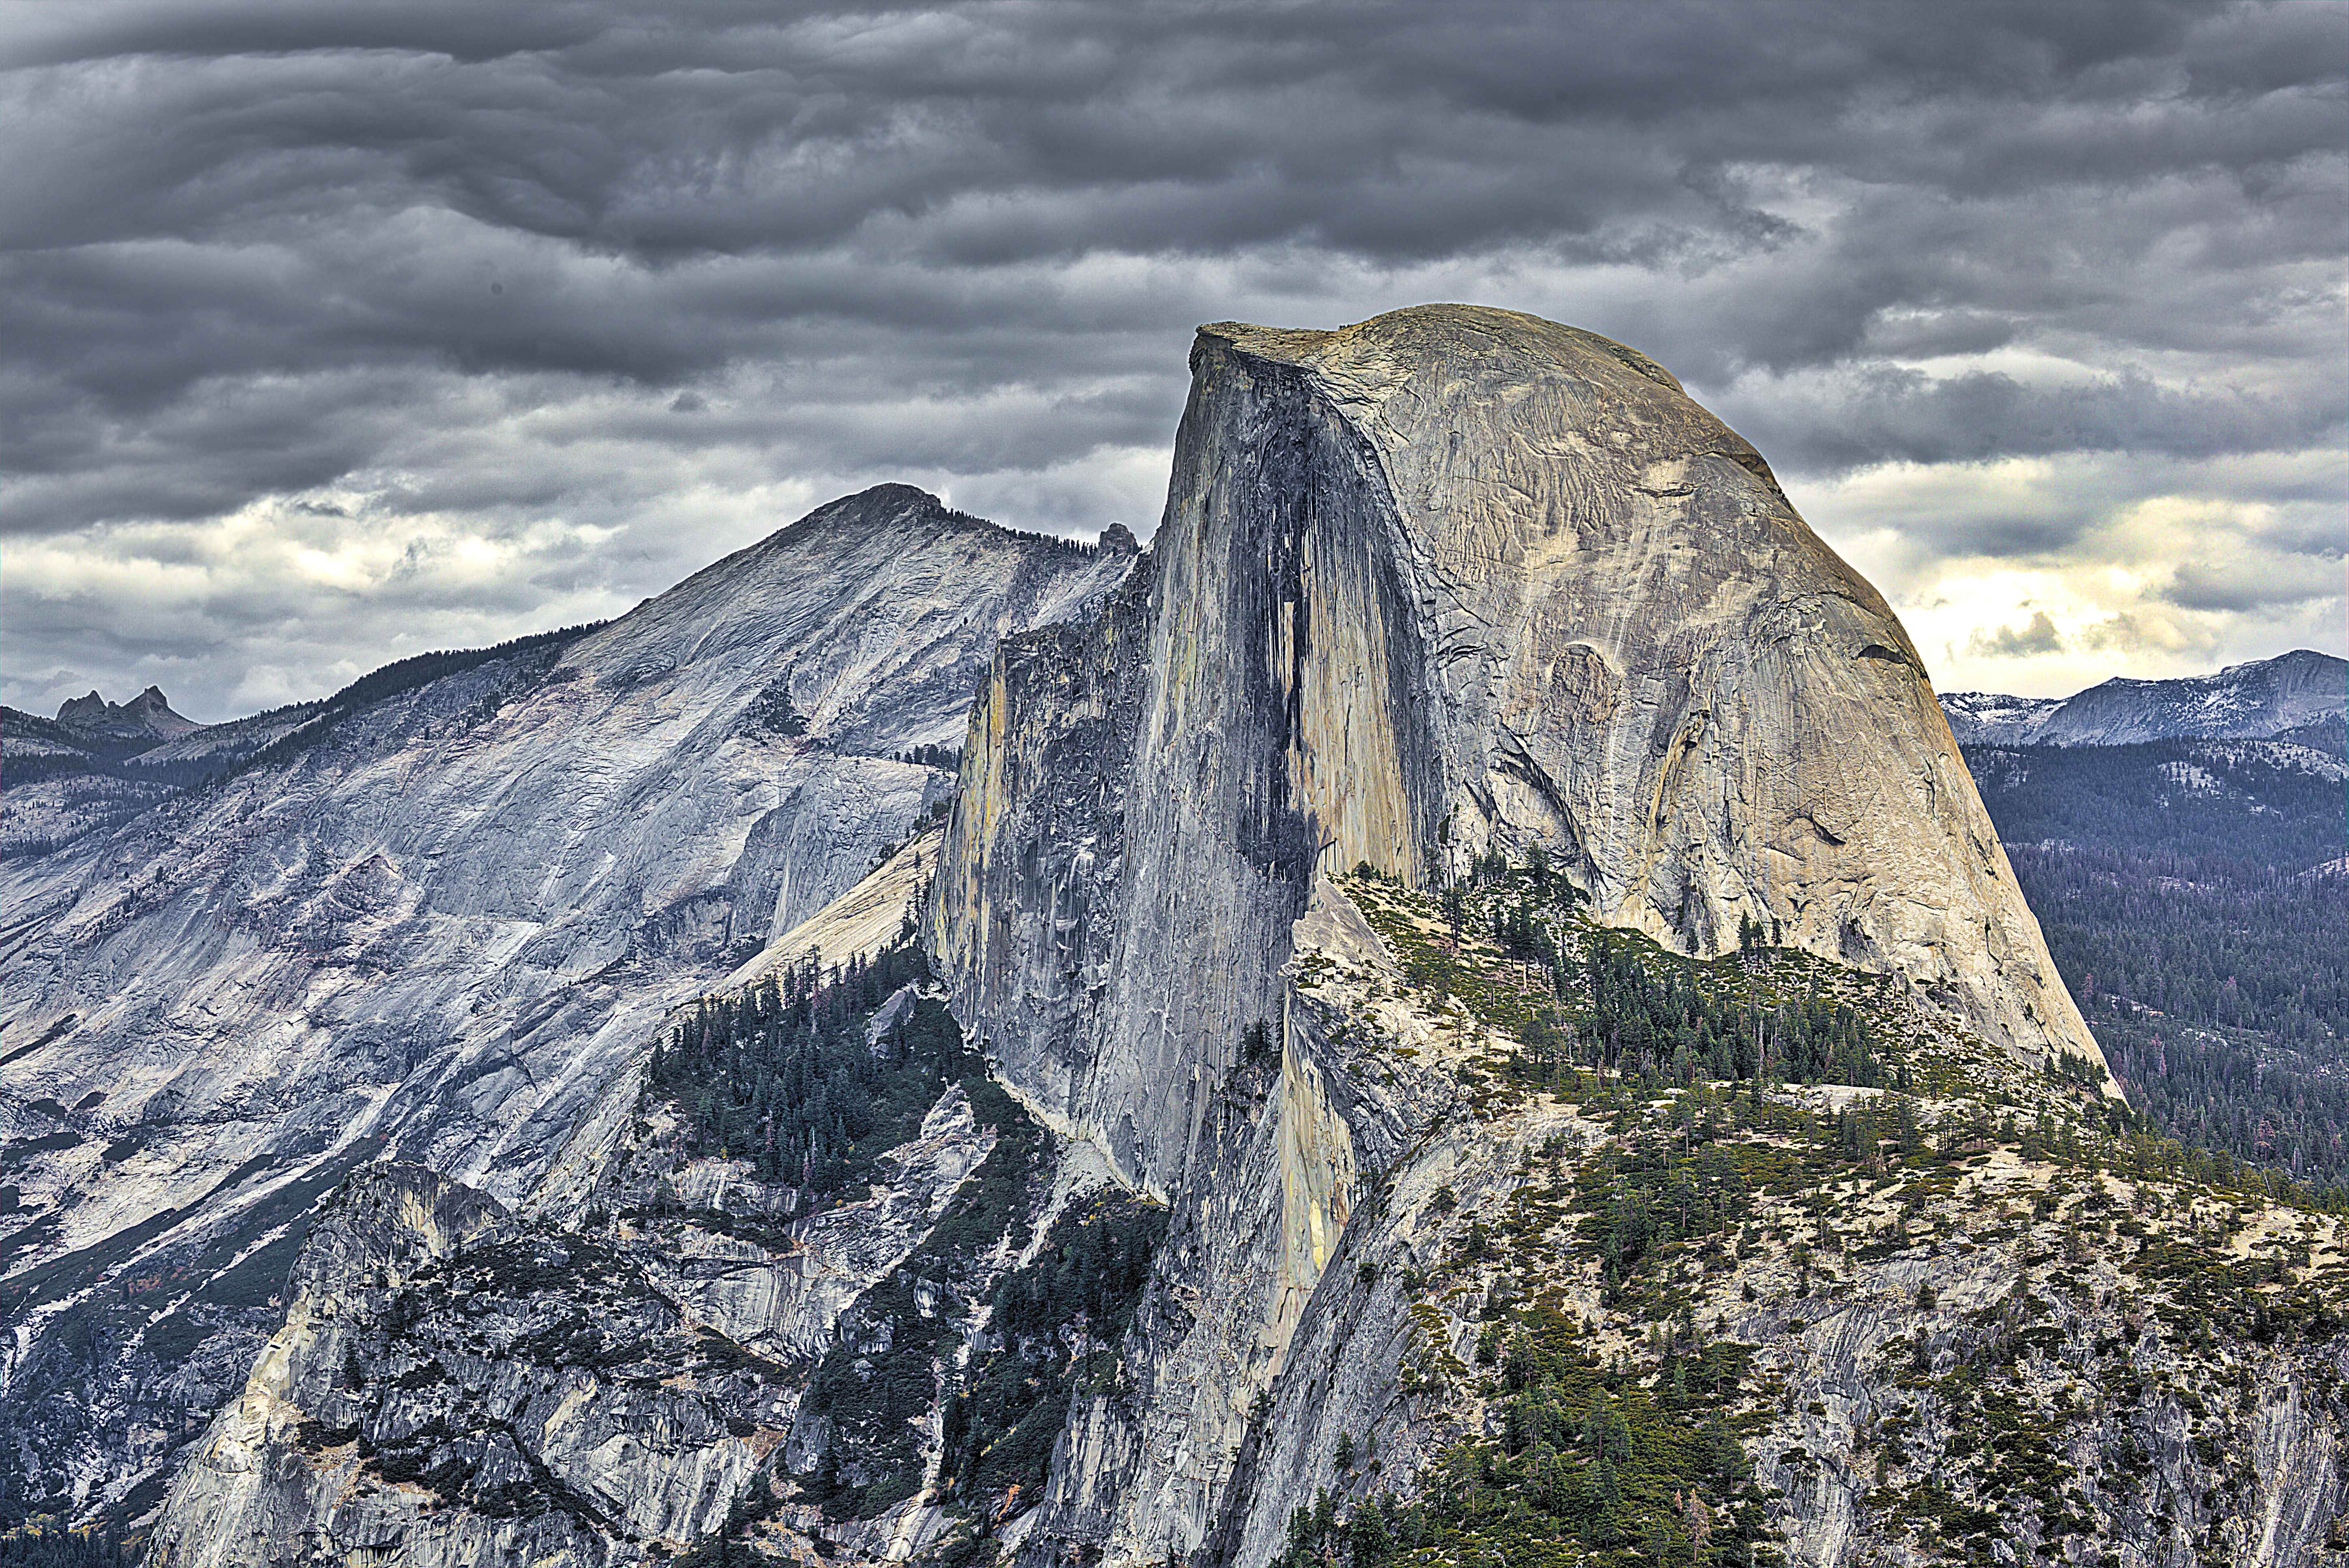 The “Face” of the Half Dome.  Taken from Glacier Point.  